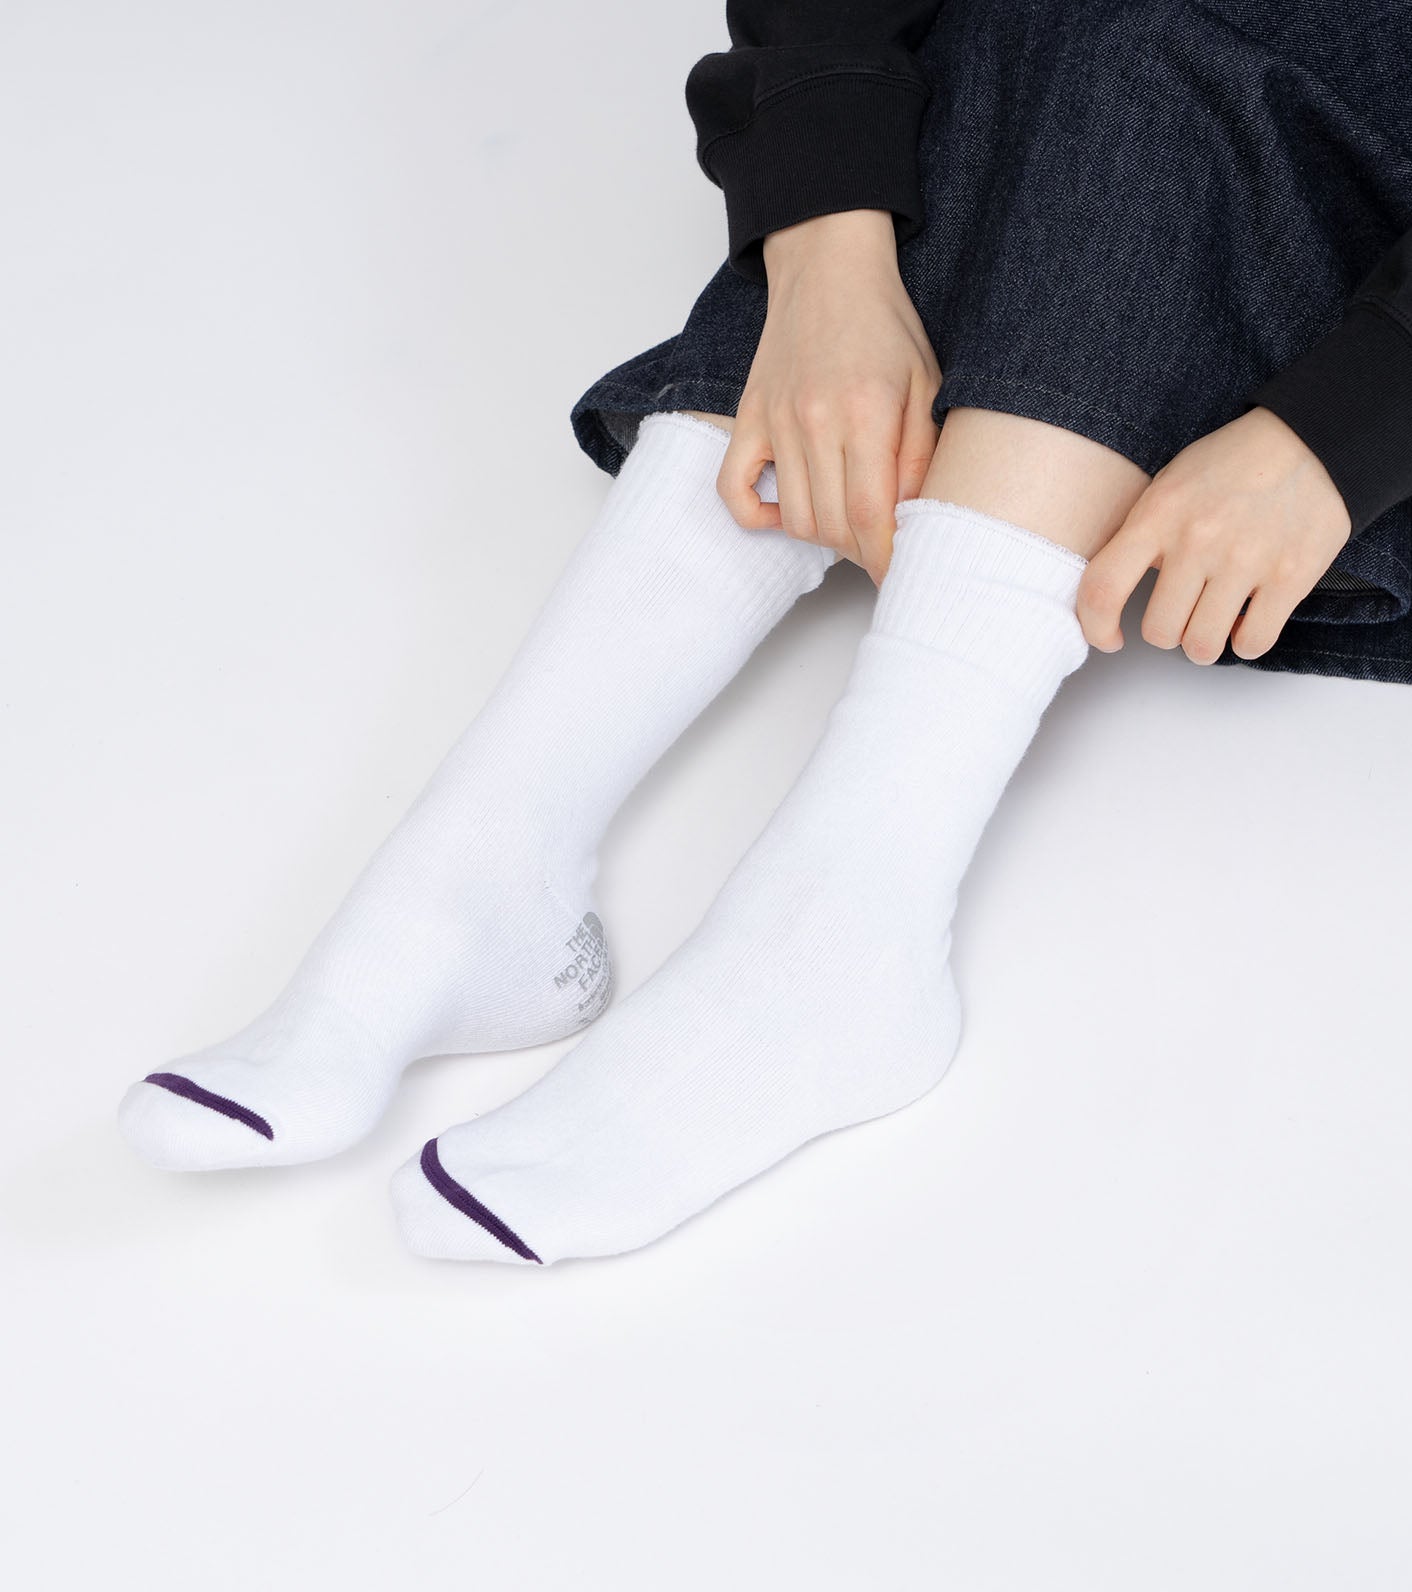 THE NORTH FACE PURPLE LABEL Pack Field Socks 2P